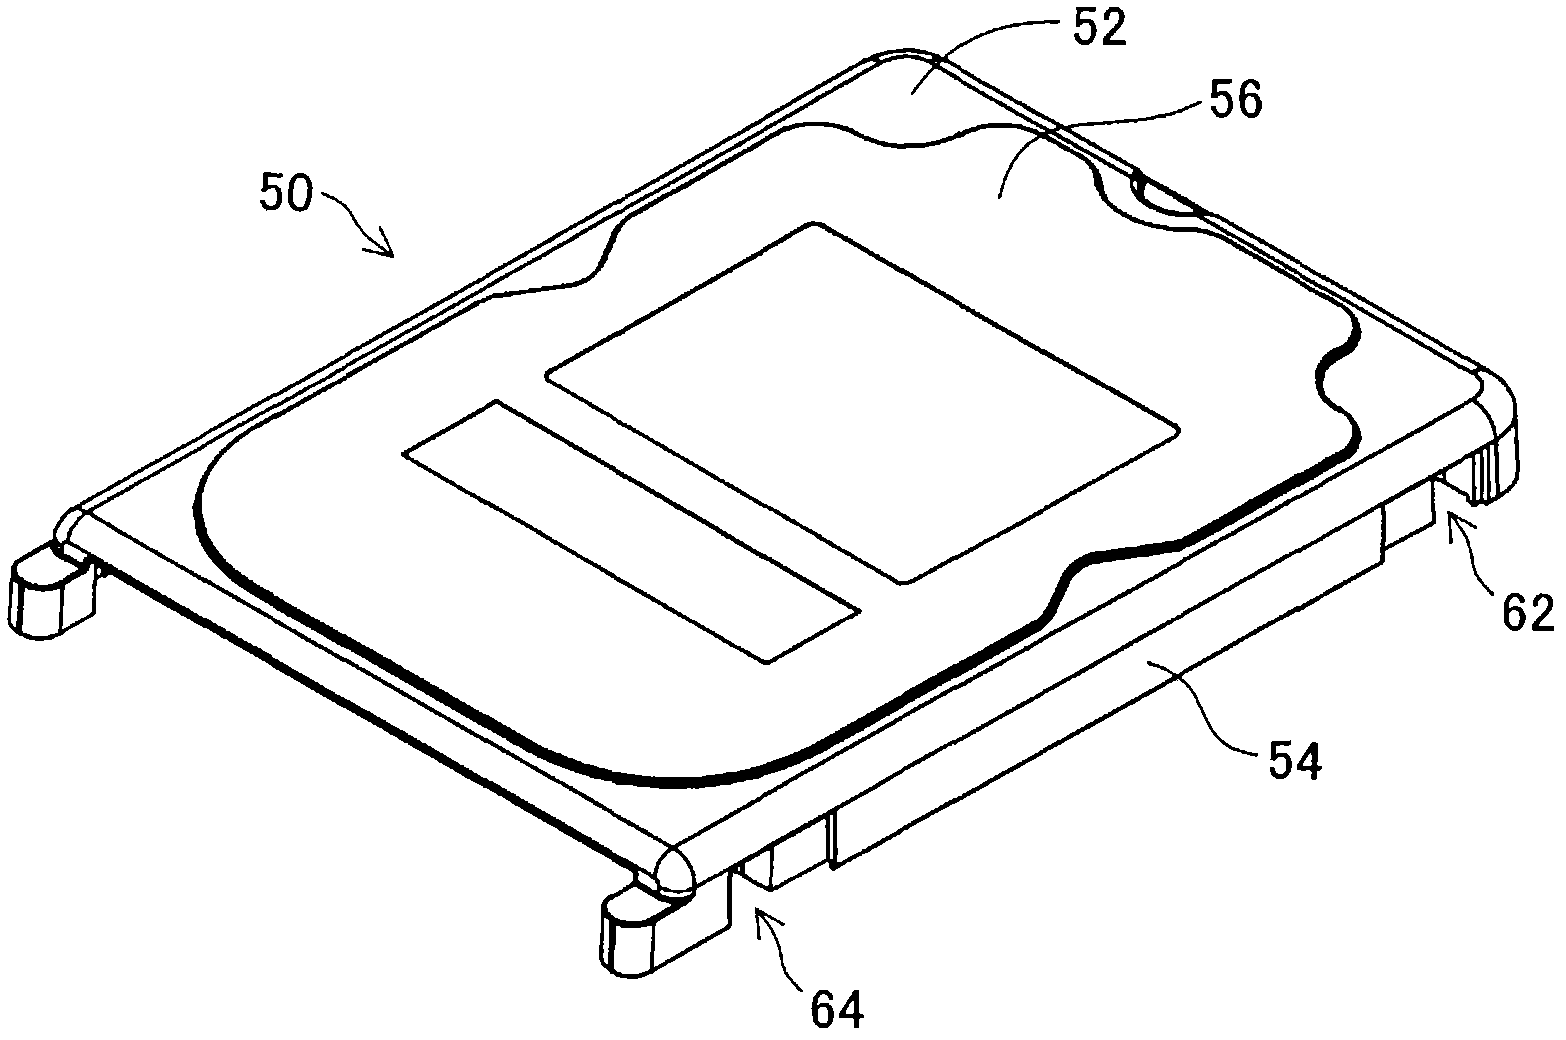 External storing device and its housing